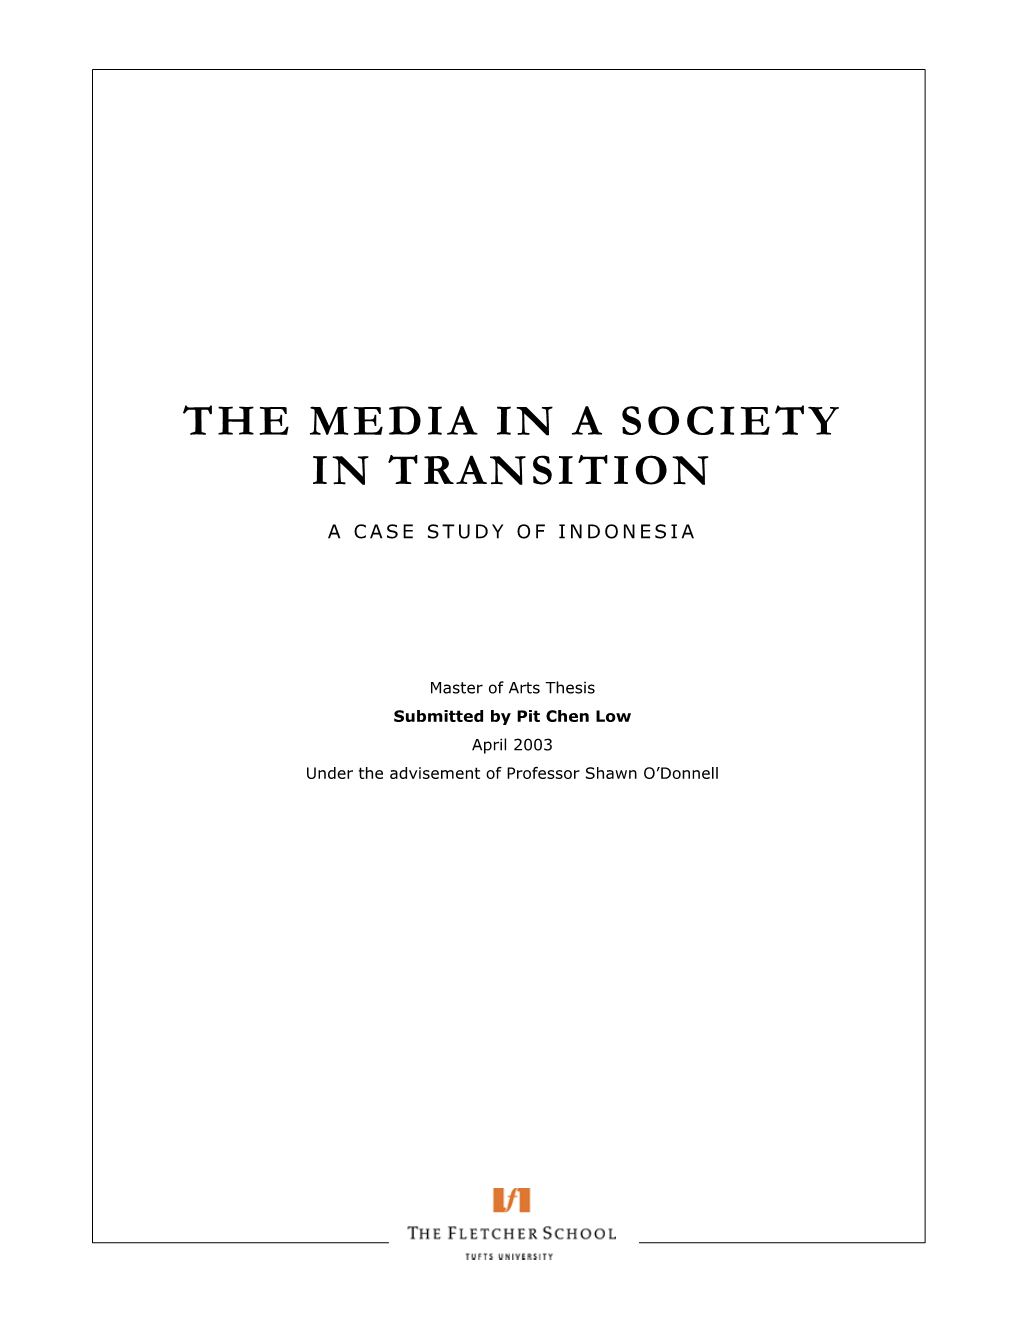 The Media in a Society in Transition